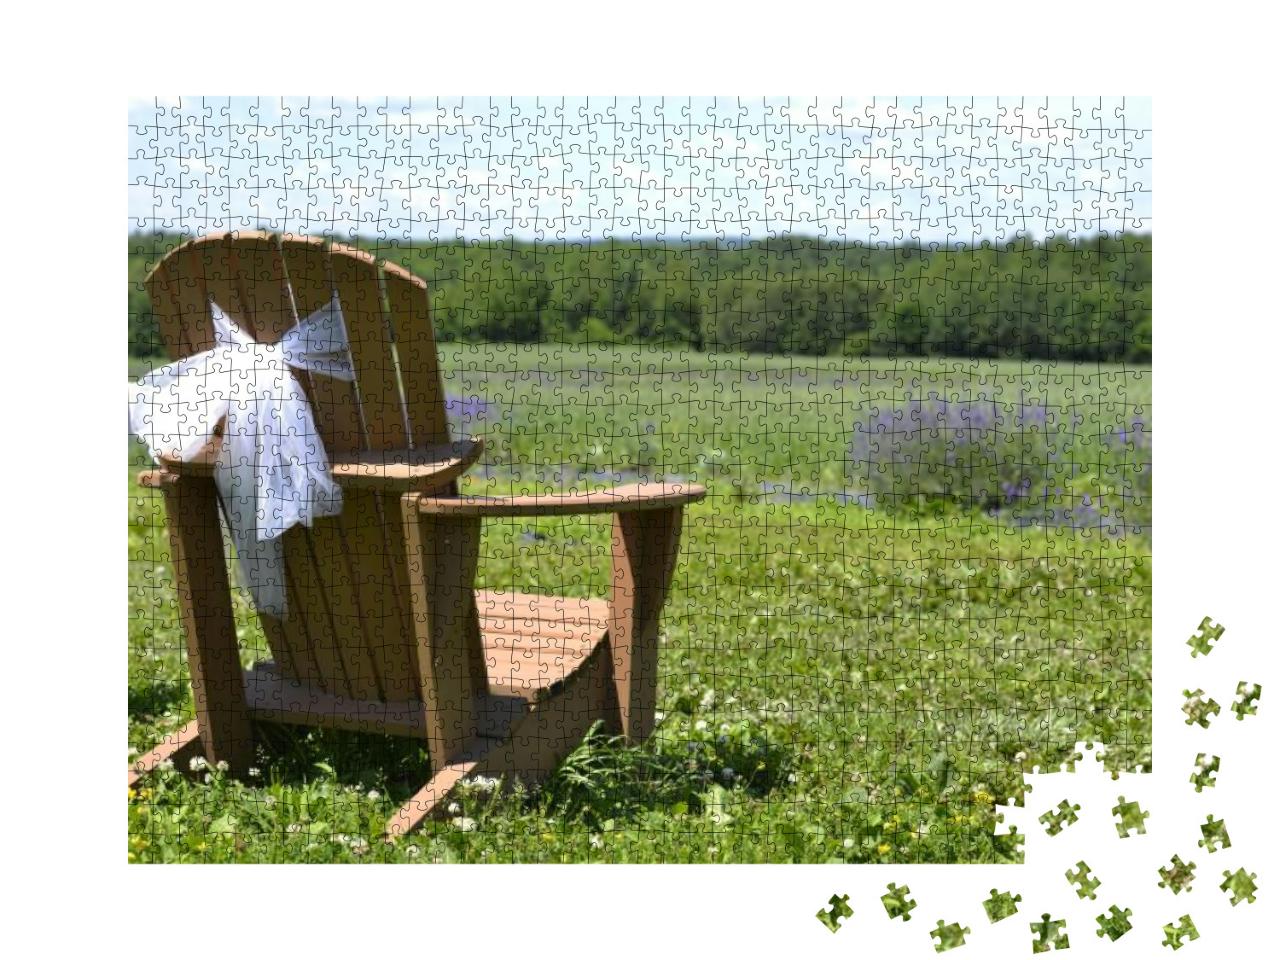 Wedding Adirondack Old Chair, on Lavender Flowers Field... Jigsaw Puzzle with 1000 pieces